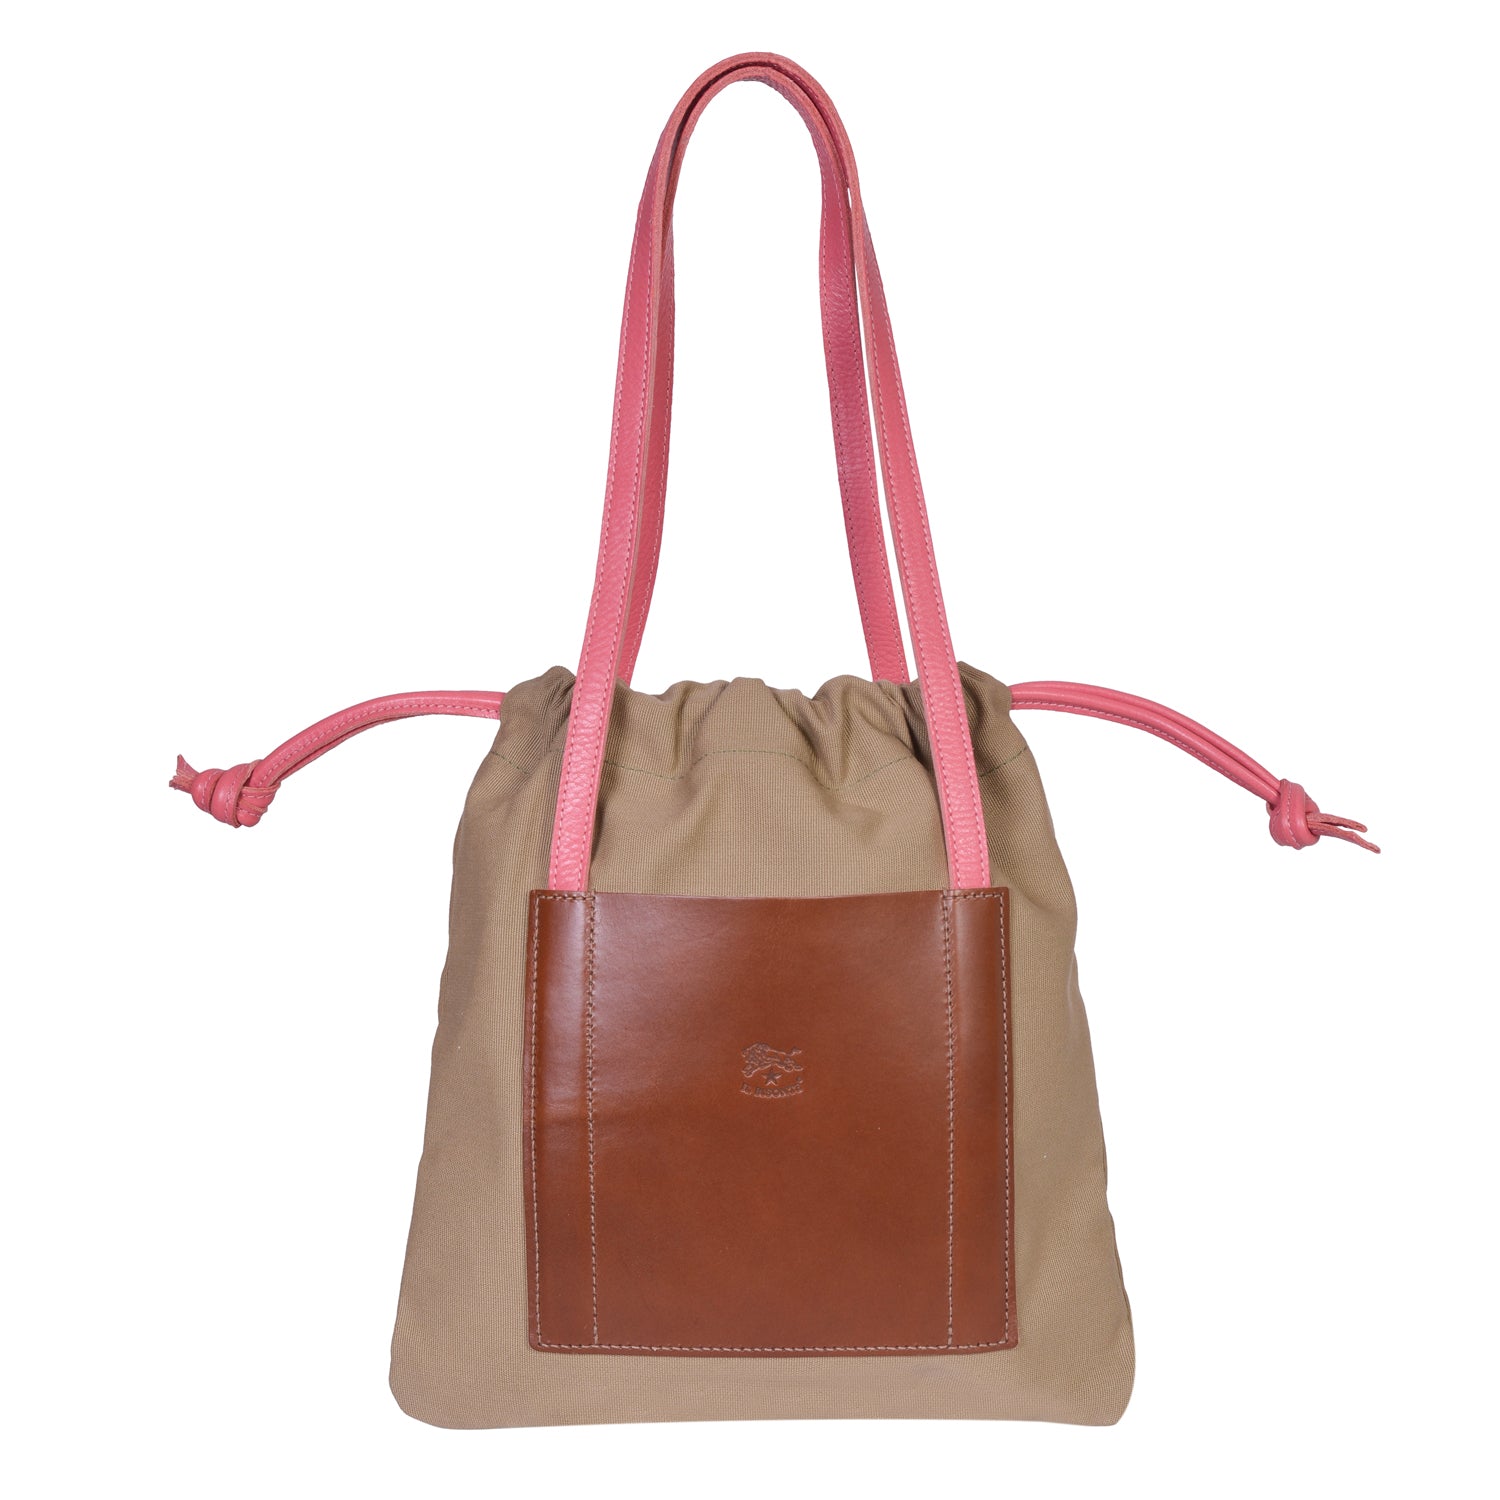 IL BISONTE  CASUAL WOMEN'S DRAWSTRING TOTE BAG IN BEIGE CANVAS